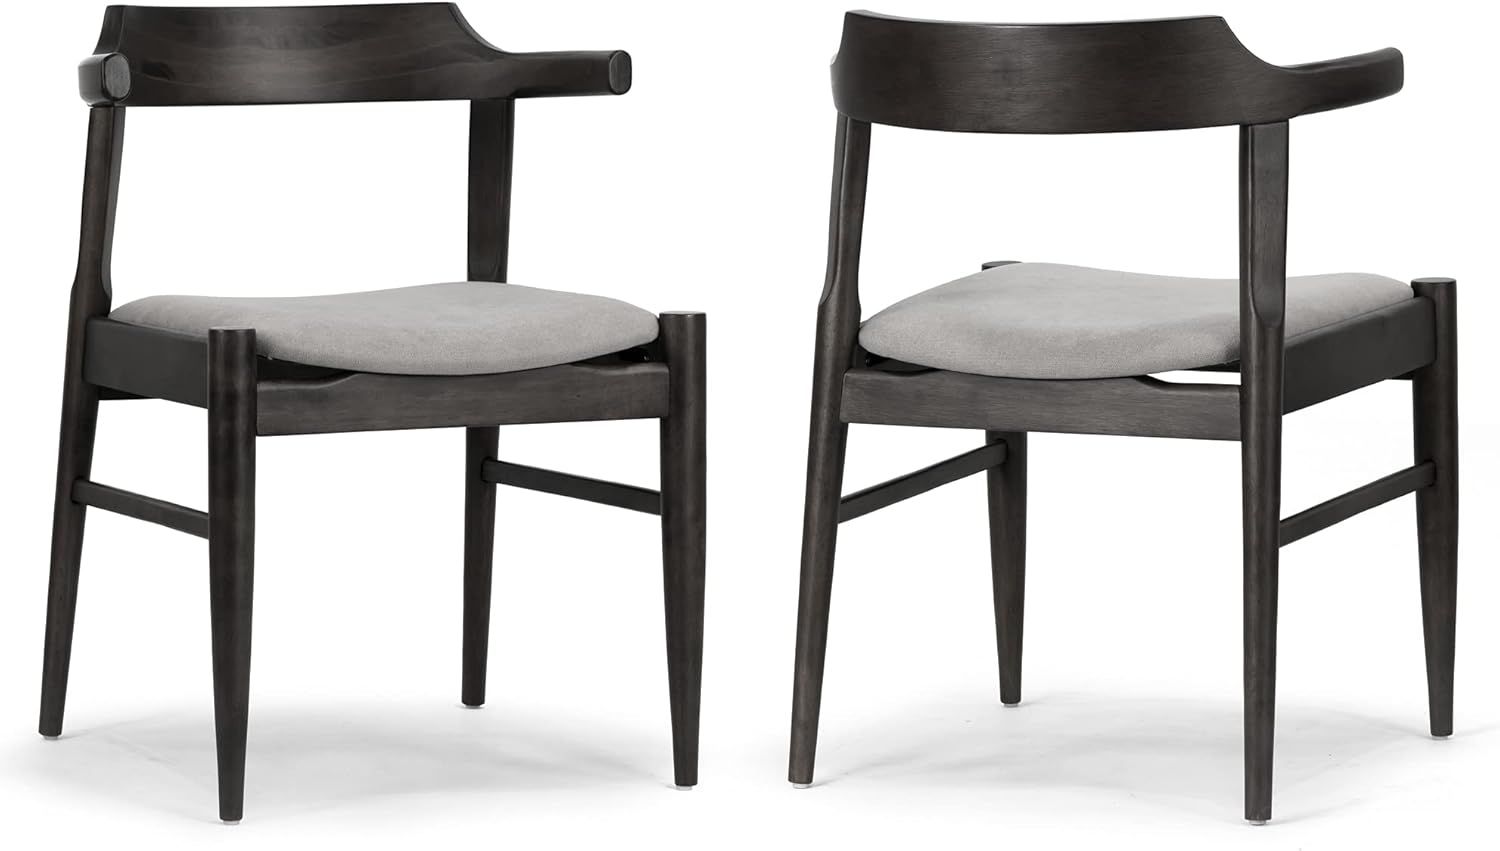 Set of 2 Atlas Retro Modern Black Wood Chair with Curved Back | Amazon (US)